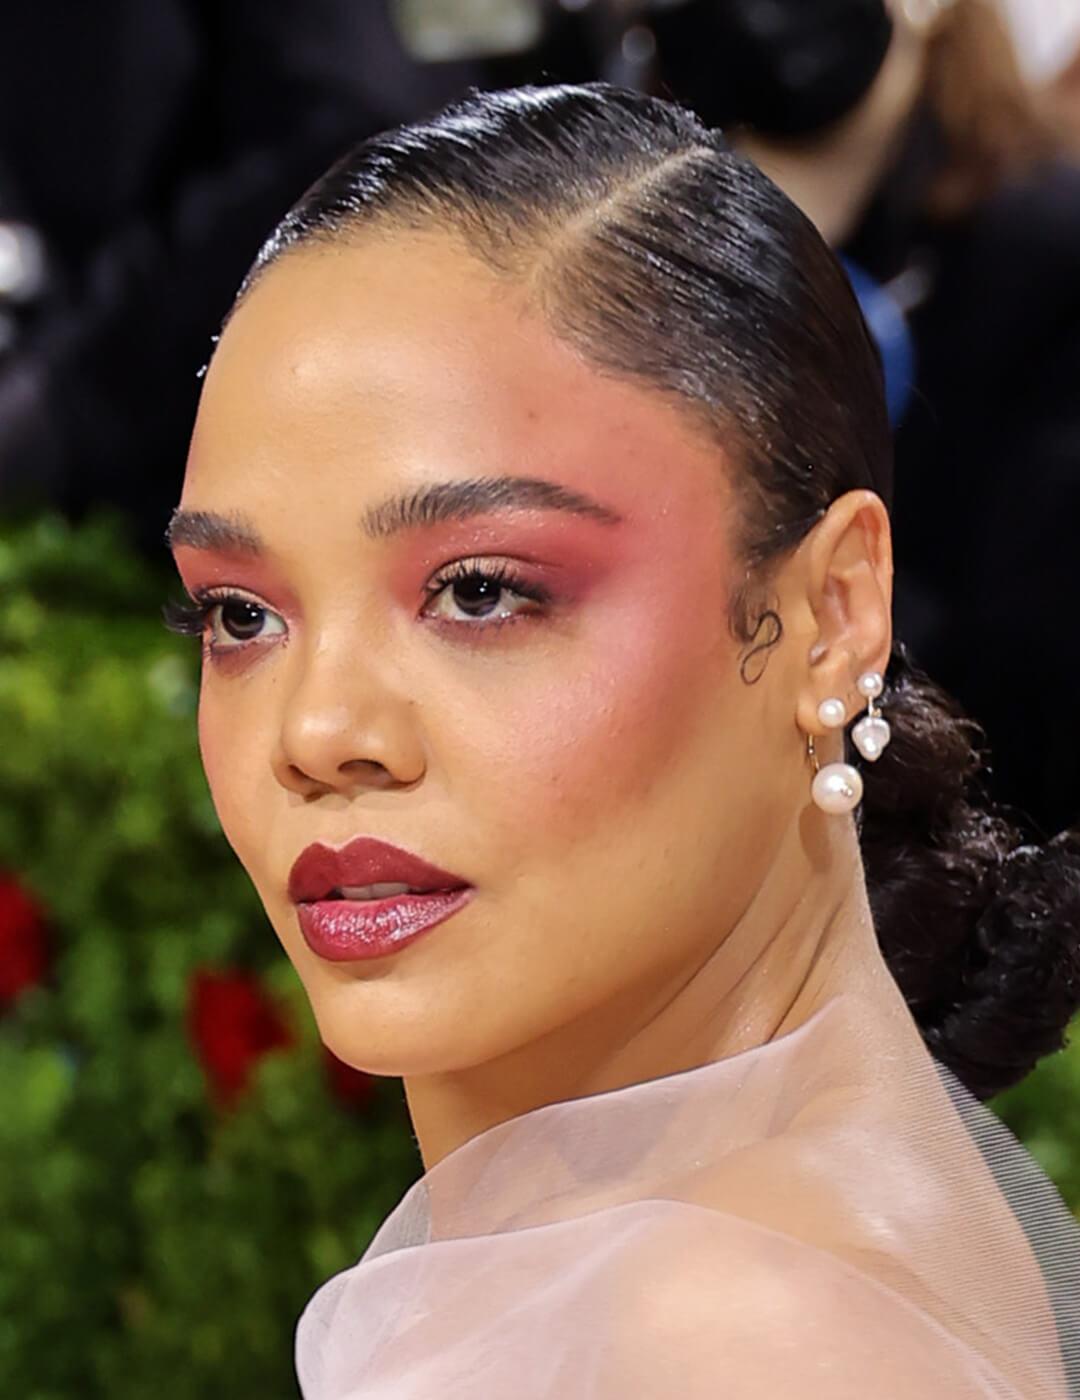 Tessa Thompson rocking a pink blush and eyeshadow paired with a neat low-ponytail hairstyle